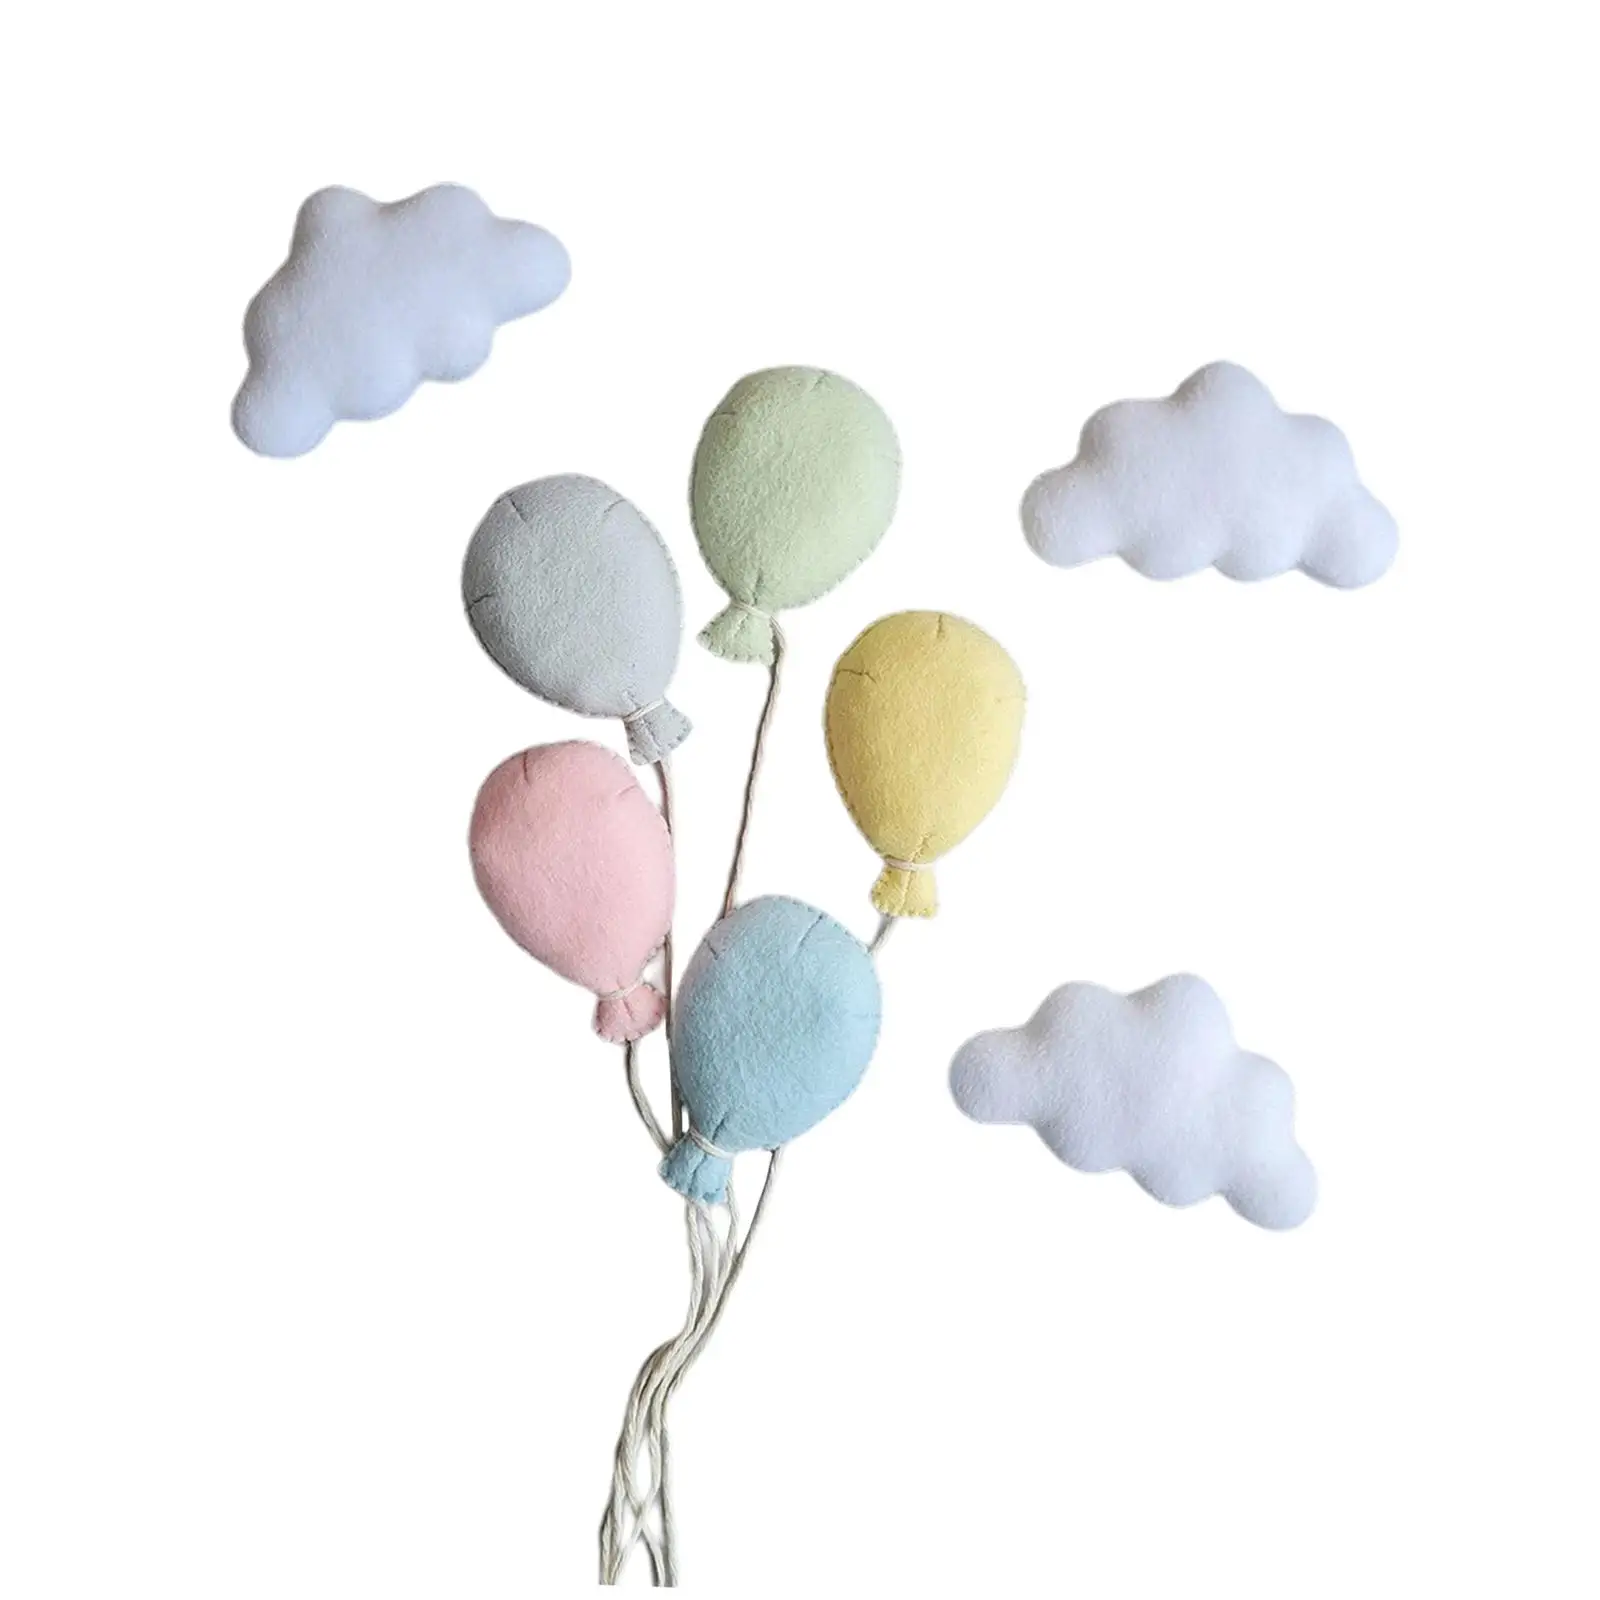 8Pcs Newborn Photo Props Photography Props Plush 3 Clouds Accessories Backdrops 5 Balloons Skin Friendly Baby Photo Props Decor